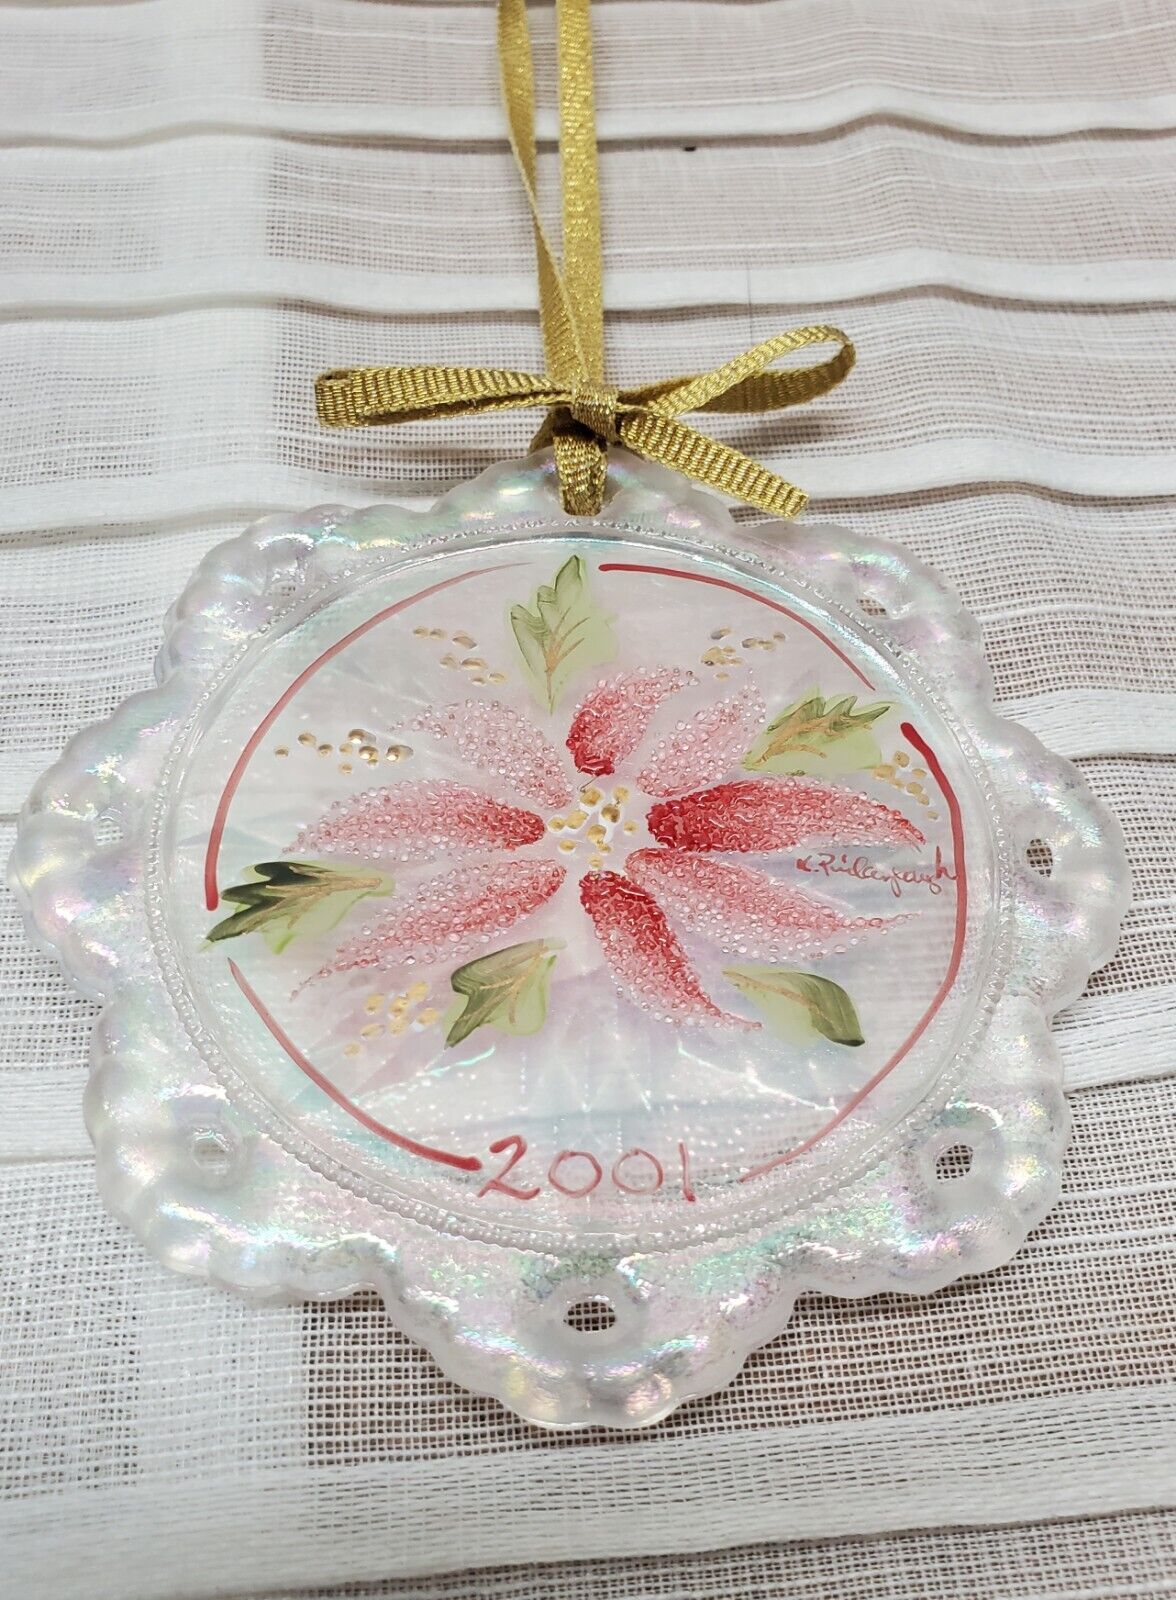 FENTON HAND PAINTED ARTIST SIGNED Iridescent GLASS with PAINTED POINSETTIA 2001